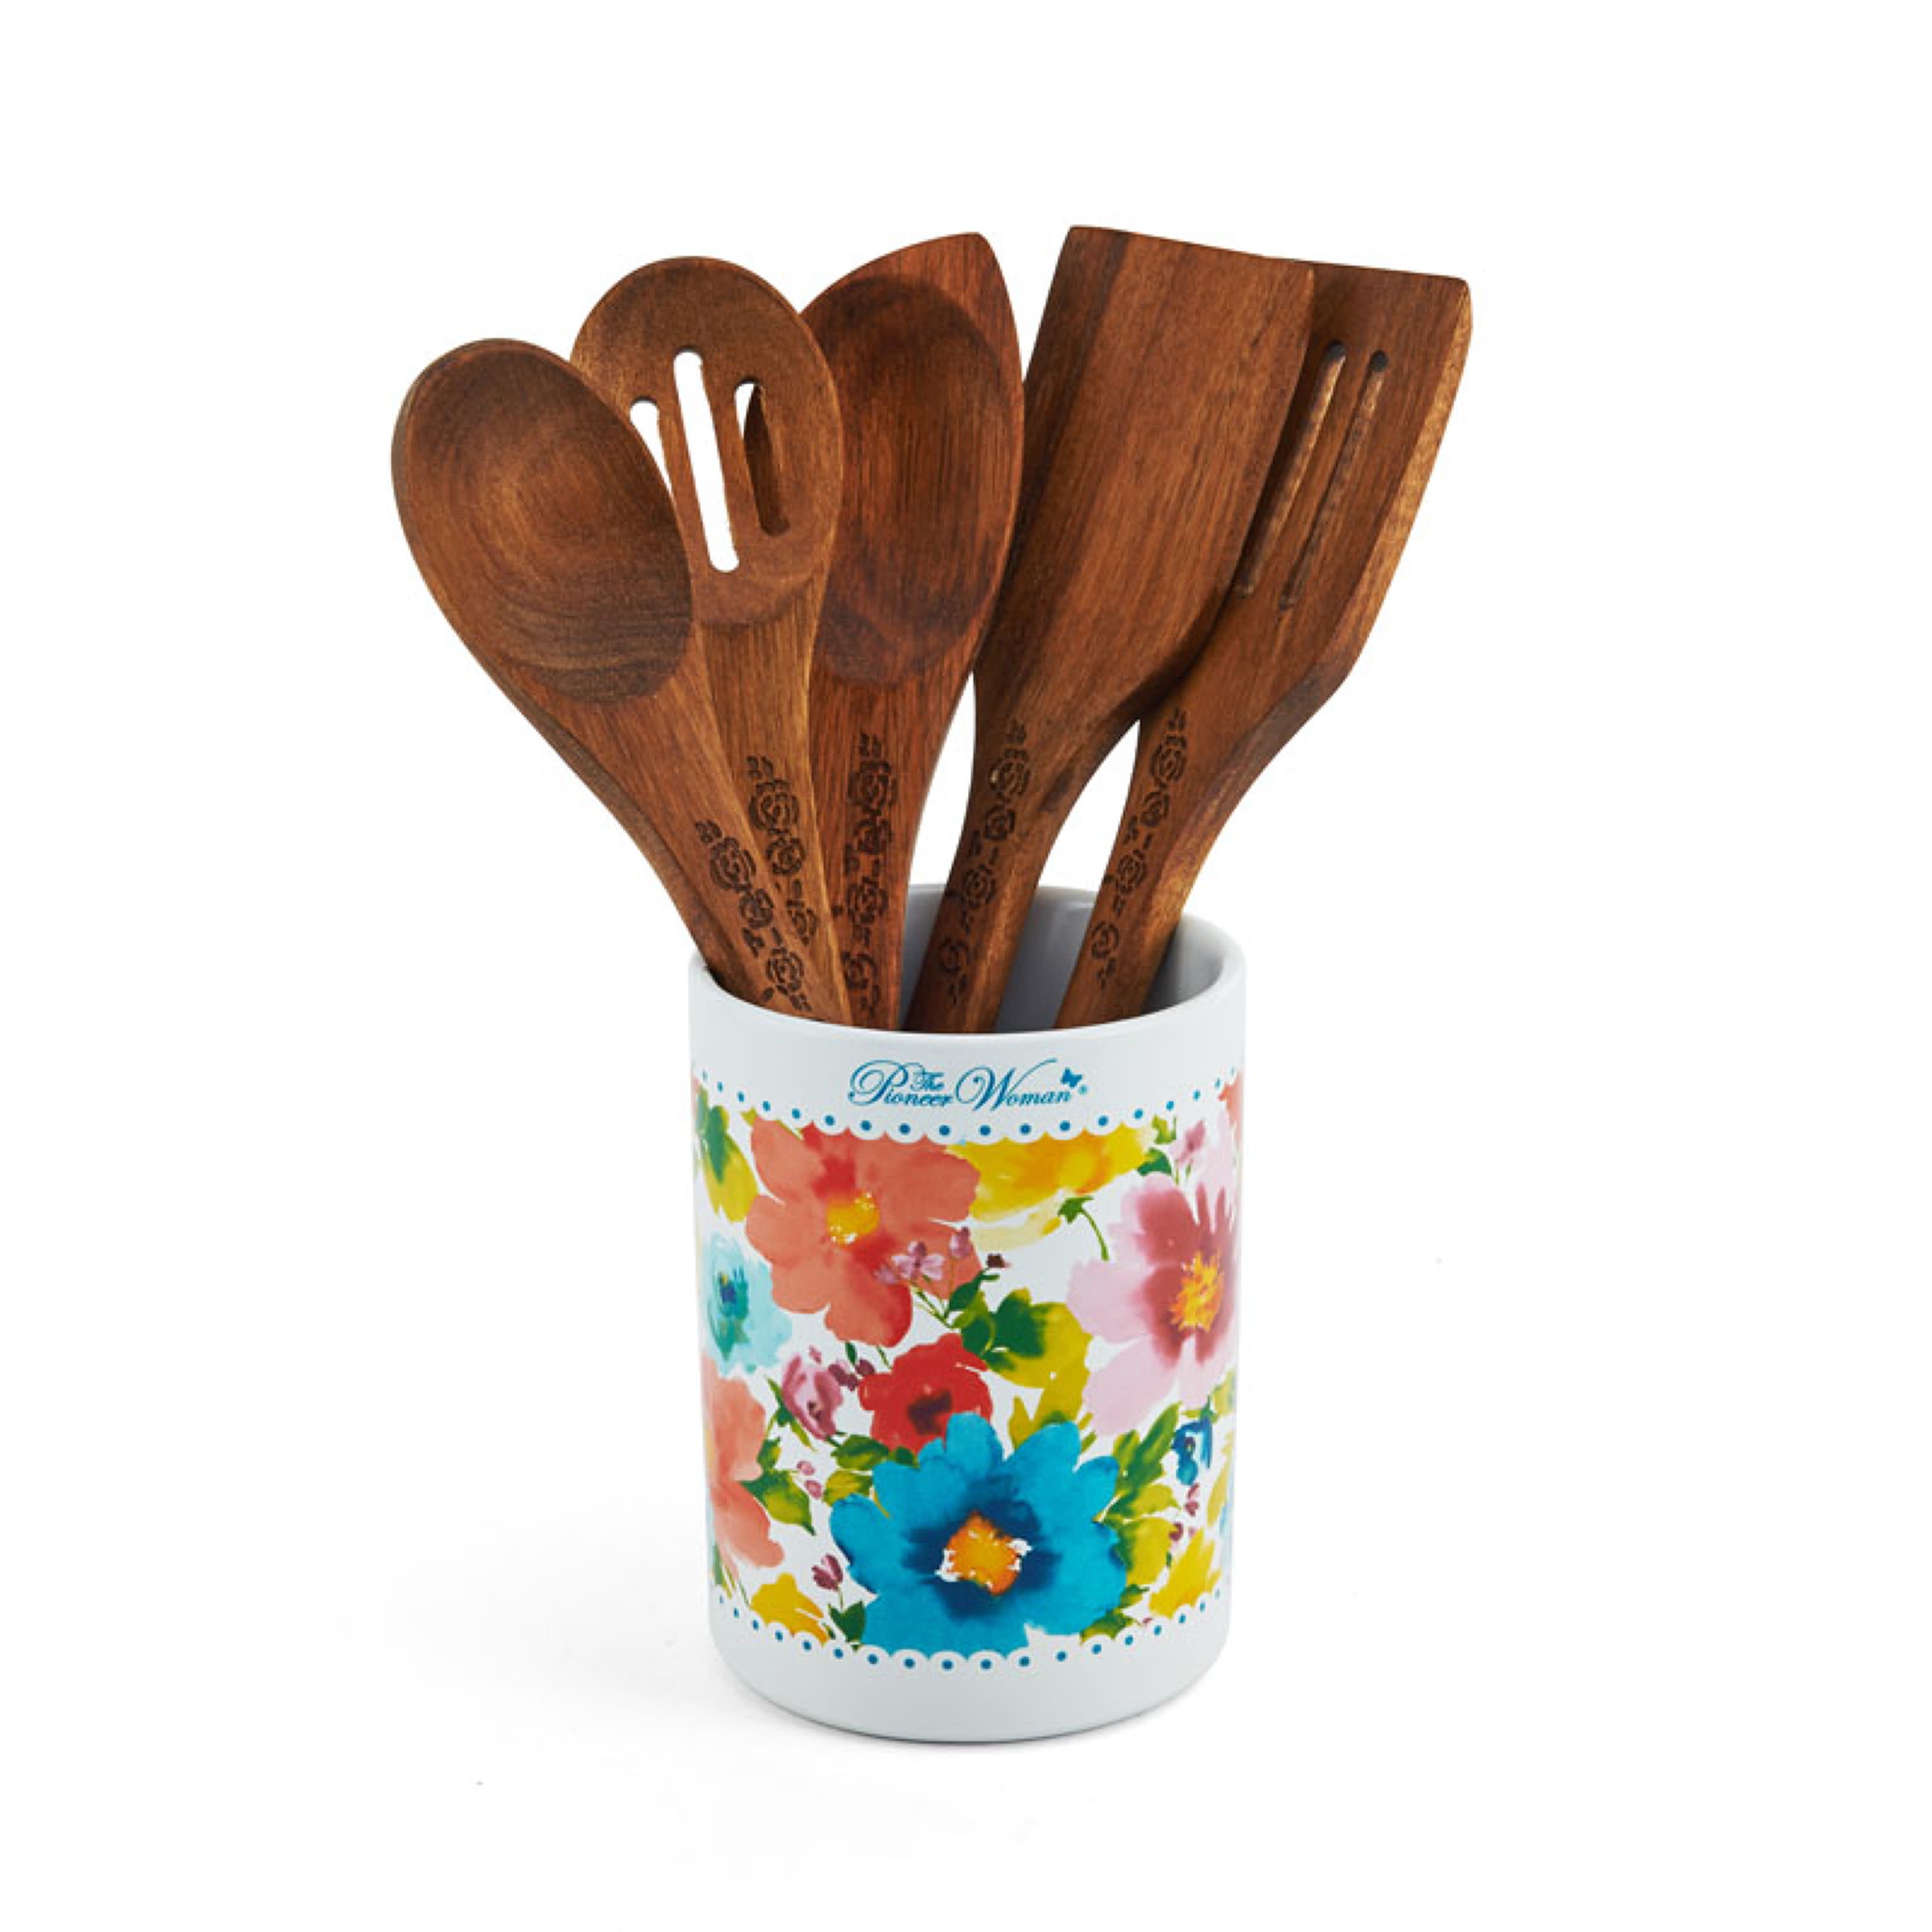 NEW THE PIONEER WOMAN VINTAGE FLORAL UTENSIL CROCK WITH 6 PIECES WOOD TOOLS 